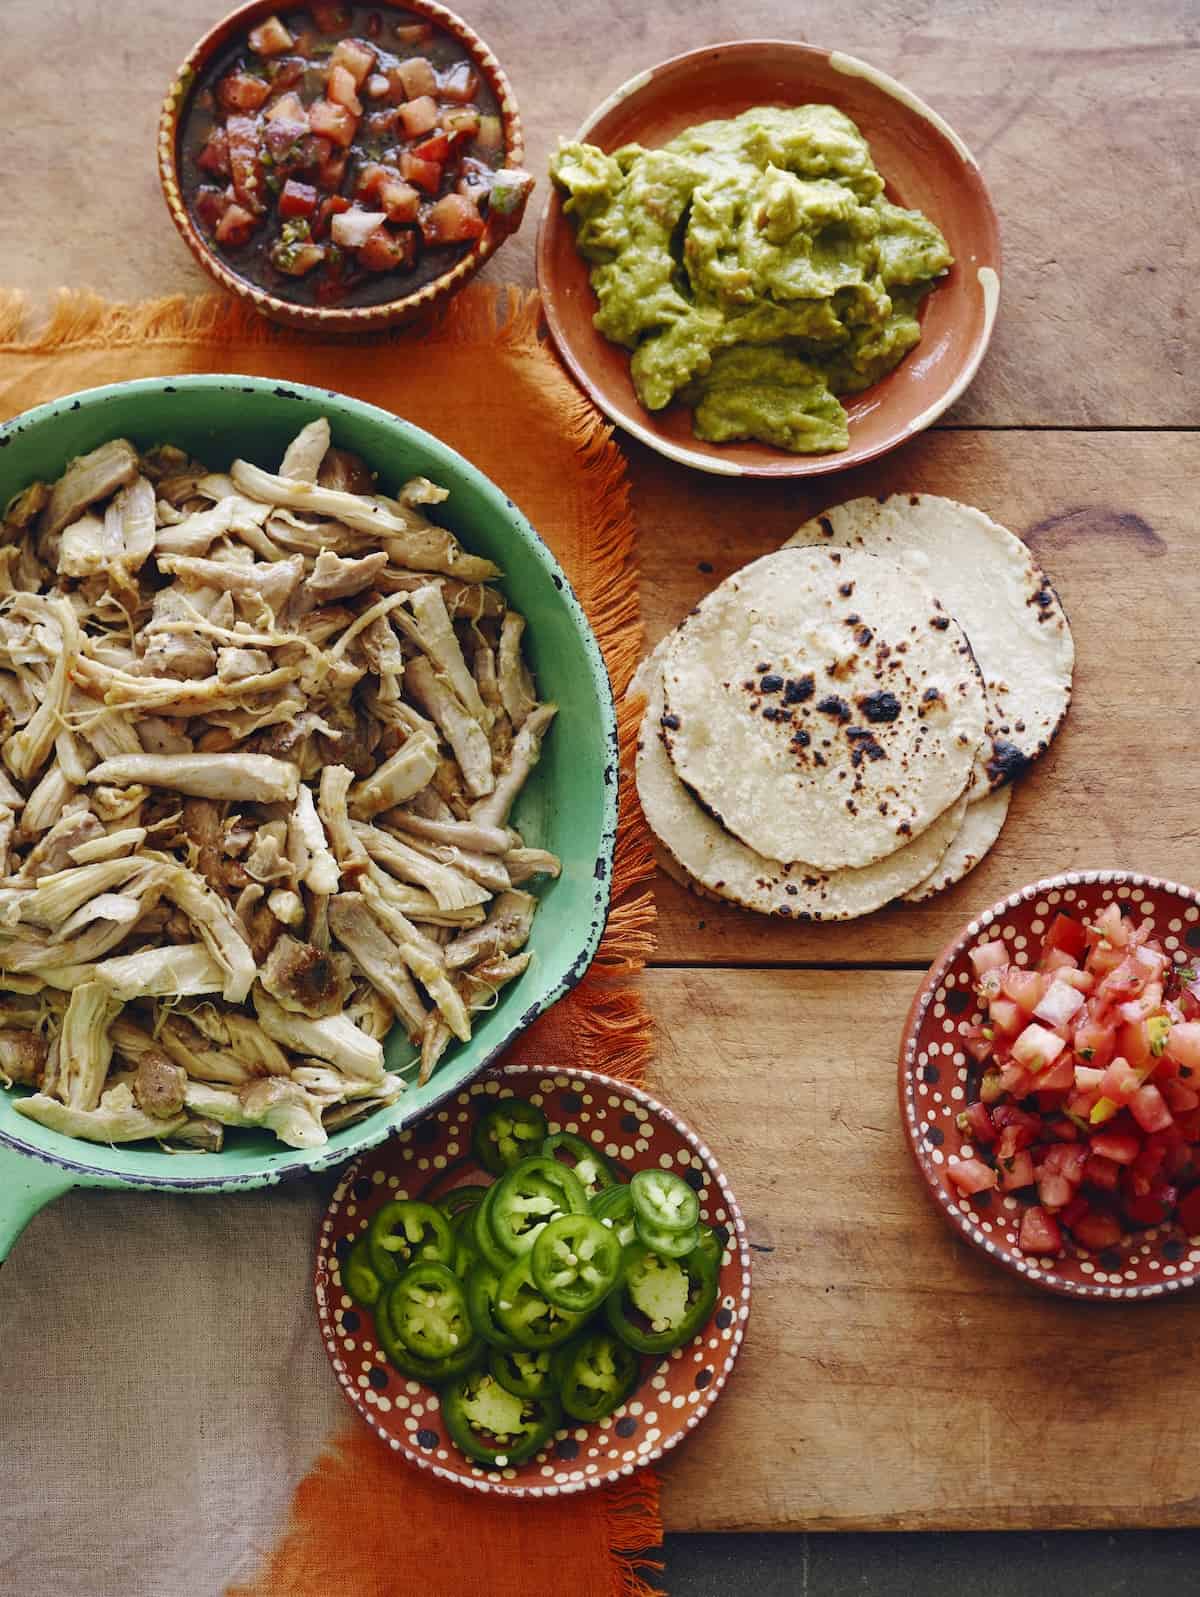 A collection of small bowls with chopped tomatoes, guacamole, sliced jalapeños and a bigger bowl with shredded chicken verde, along with tortillas laid out on the table.